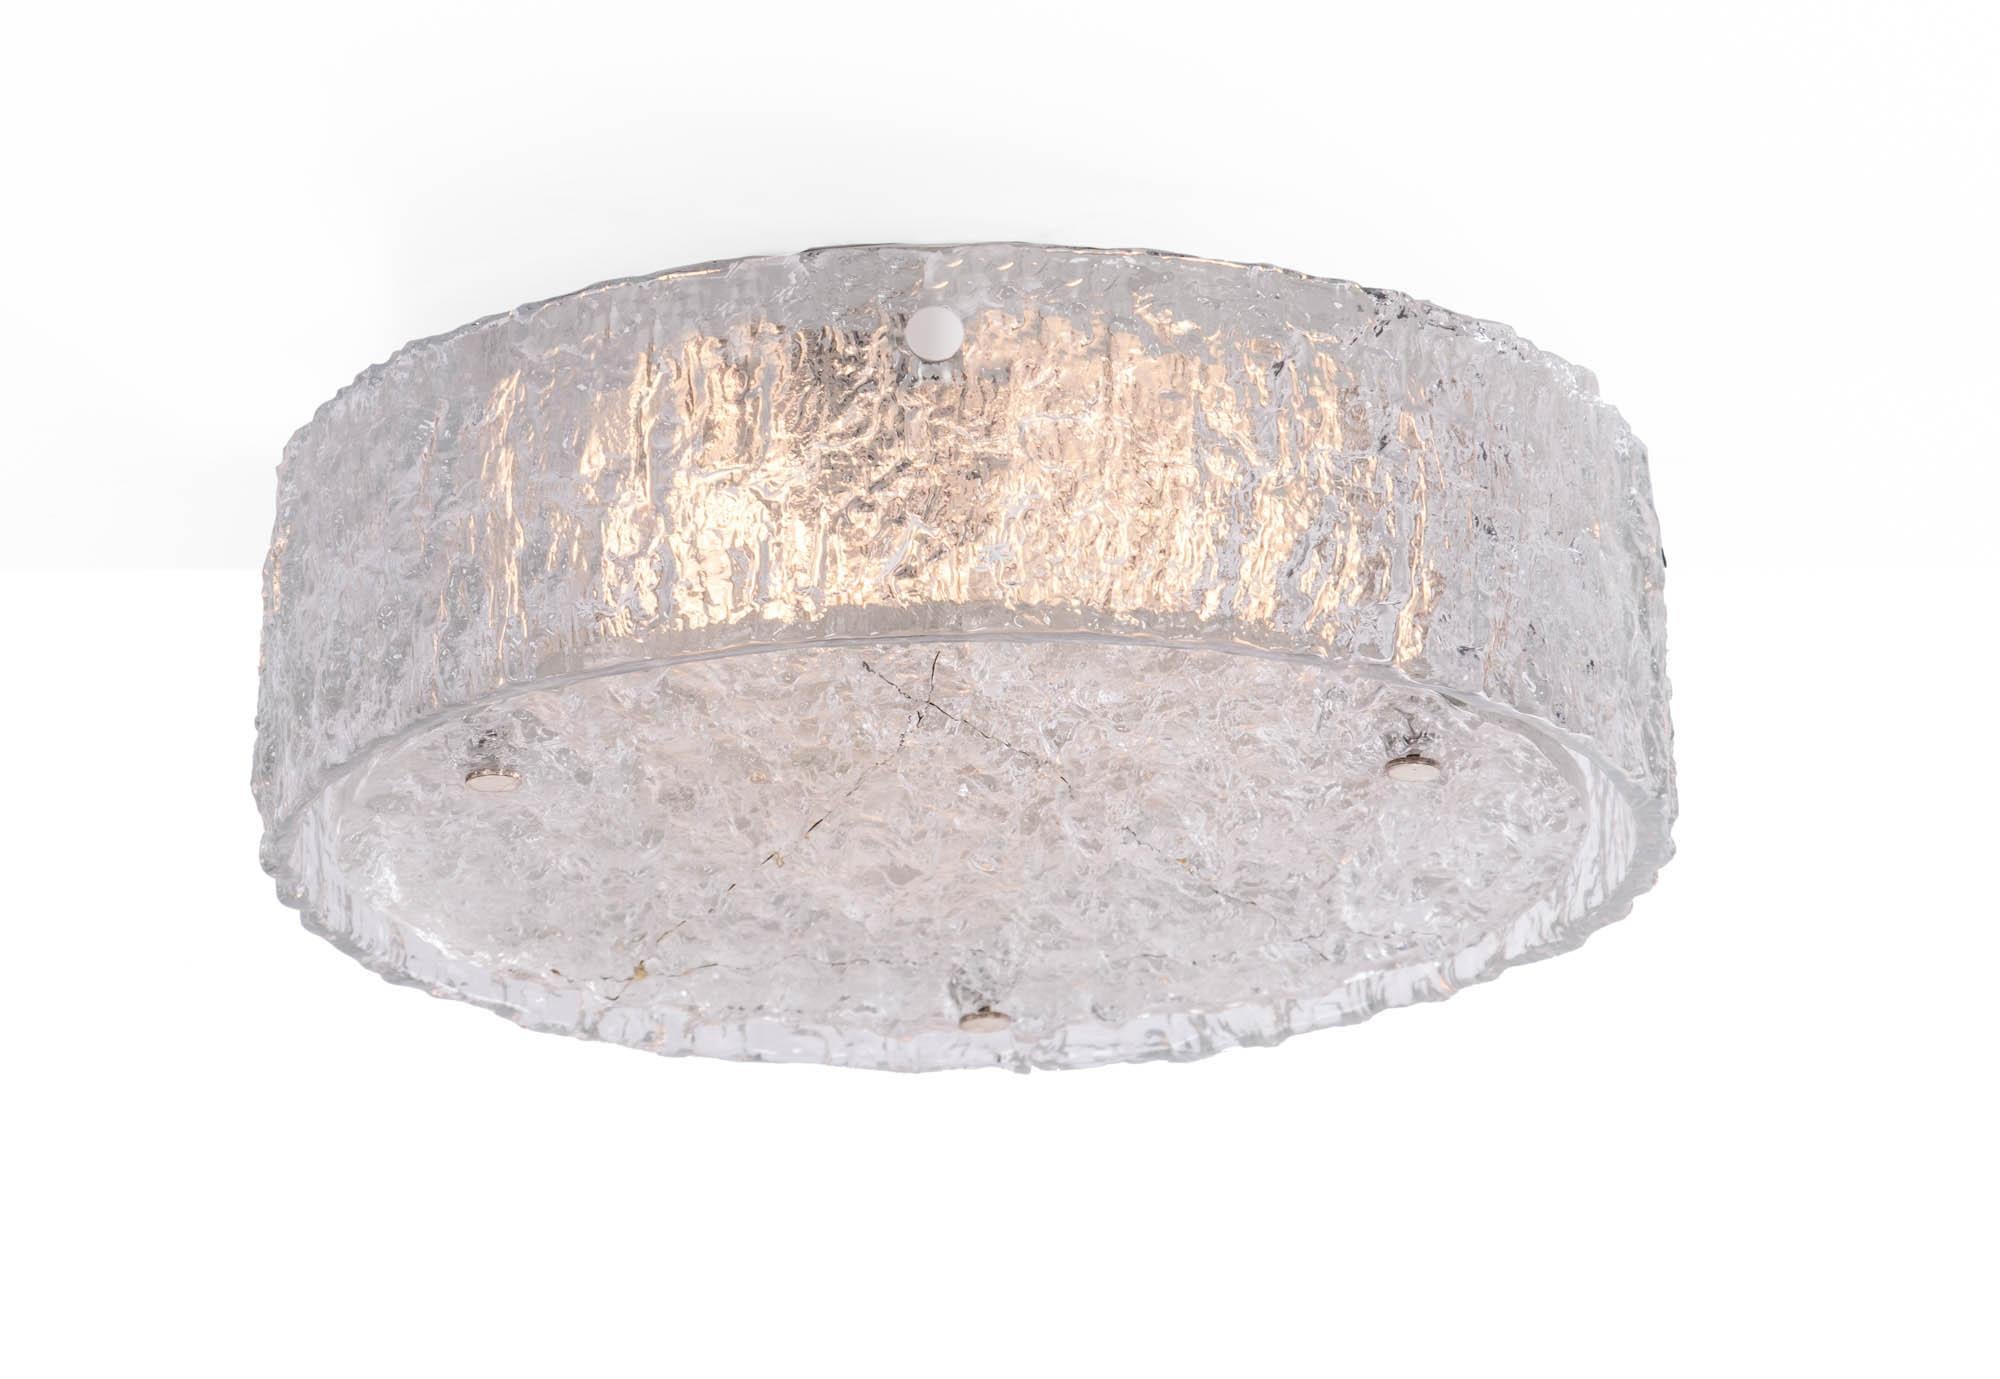 Gorgeous large two part drum-shaped flush mount chandelier with one ring outside and a flat disc made of heavy textured clear iced glass on a white laquered metal frame with chromed nickel finals. Manufactured by Kaiser Lighting, Germany in the